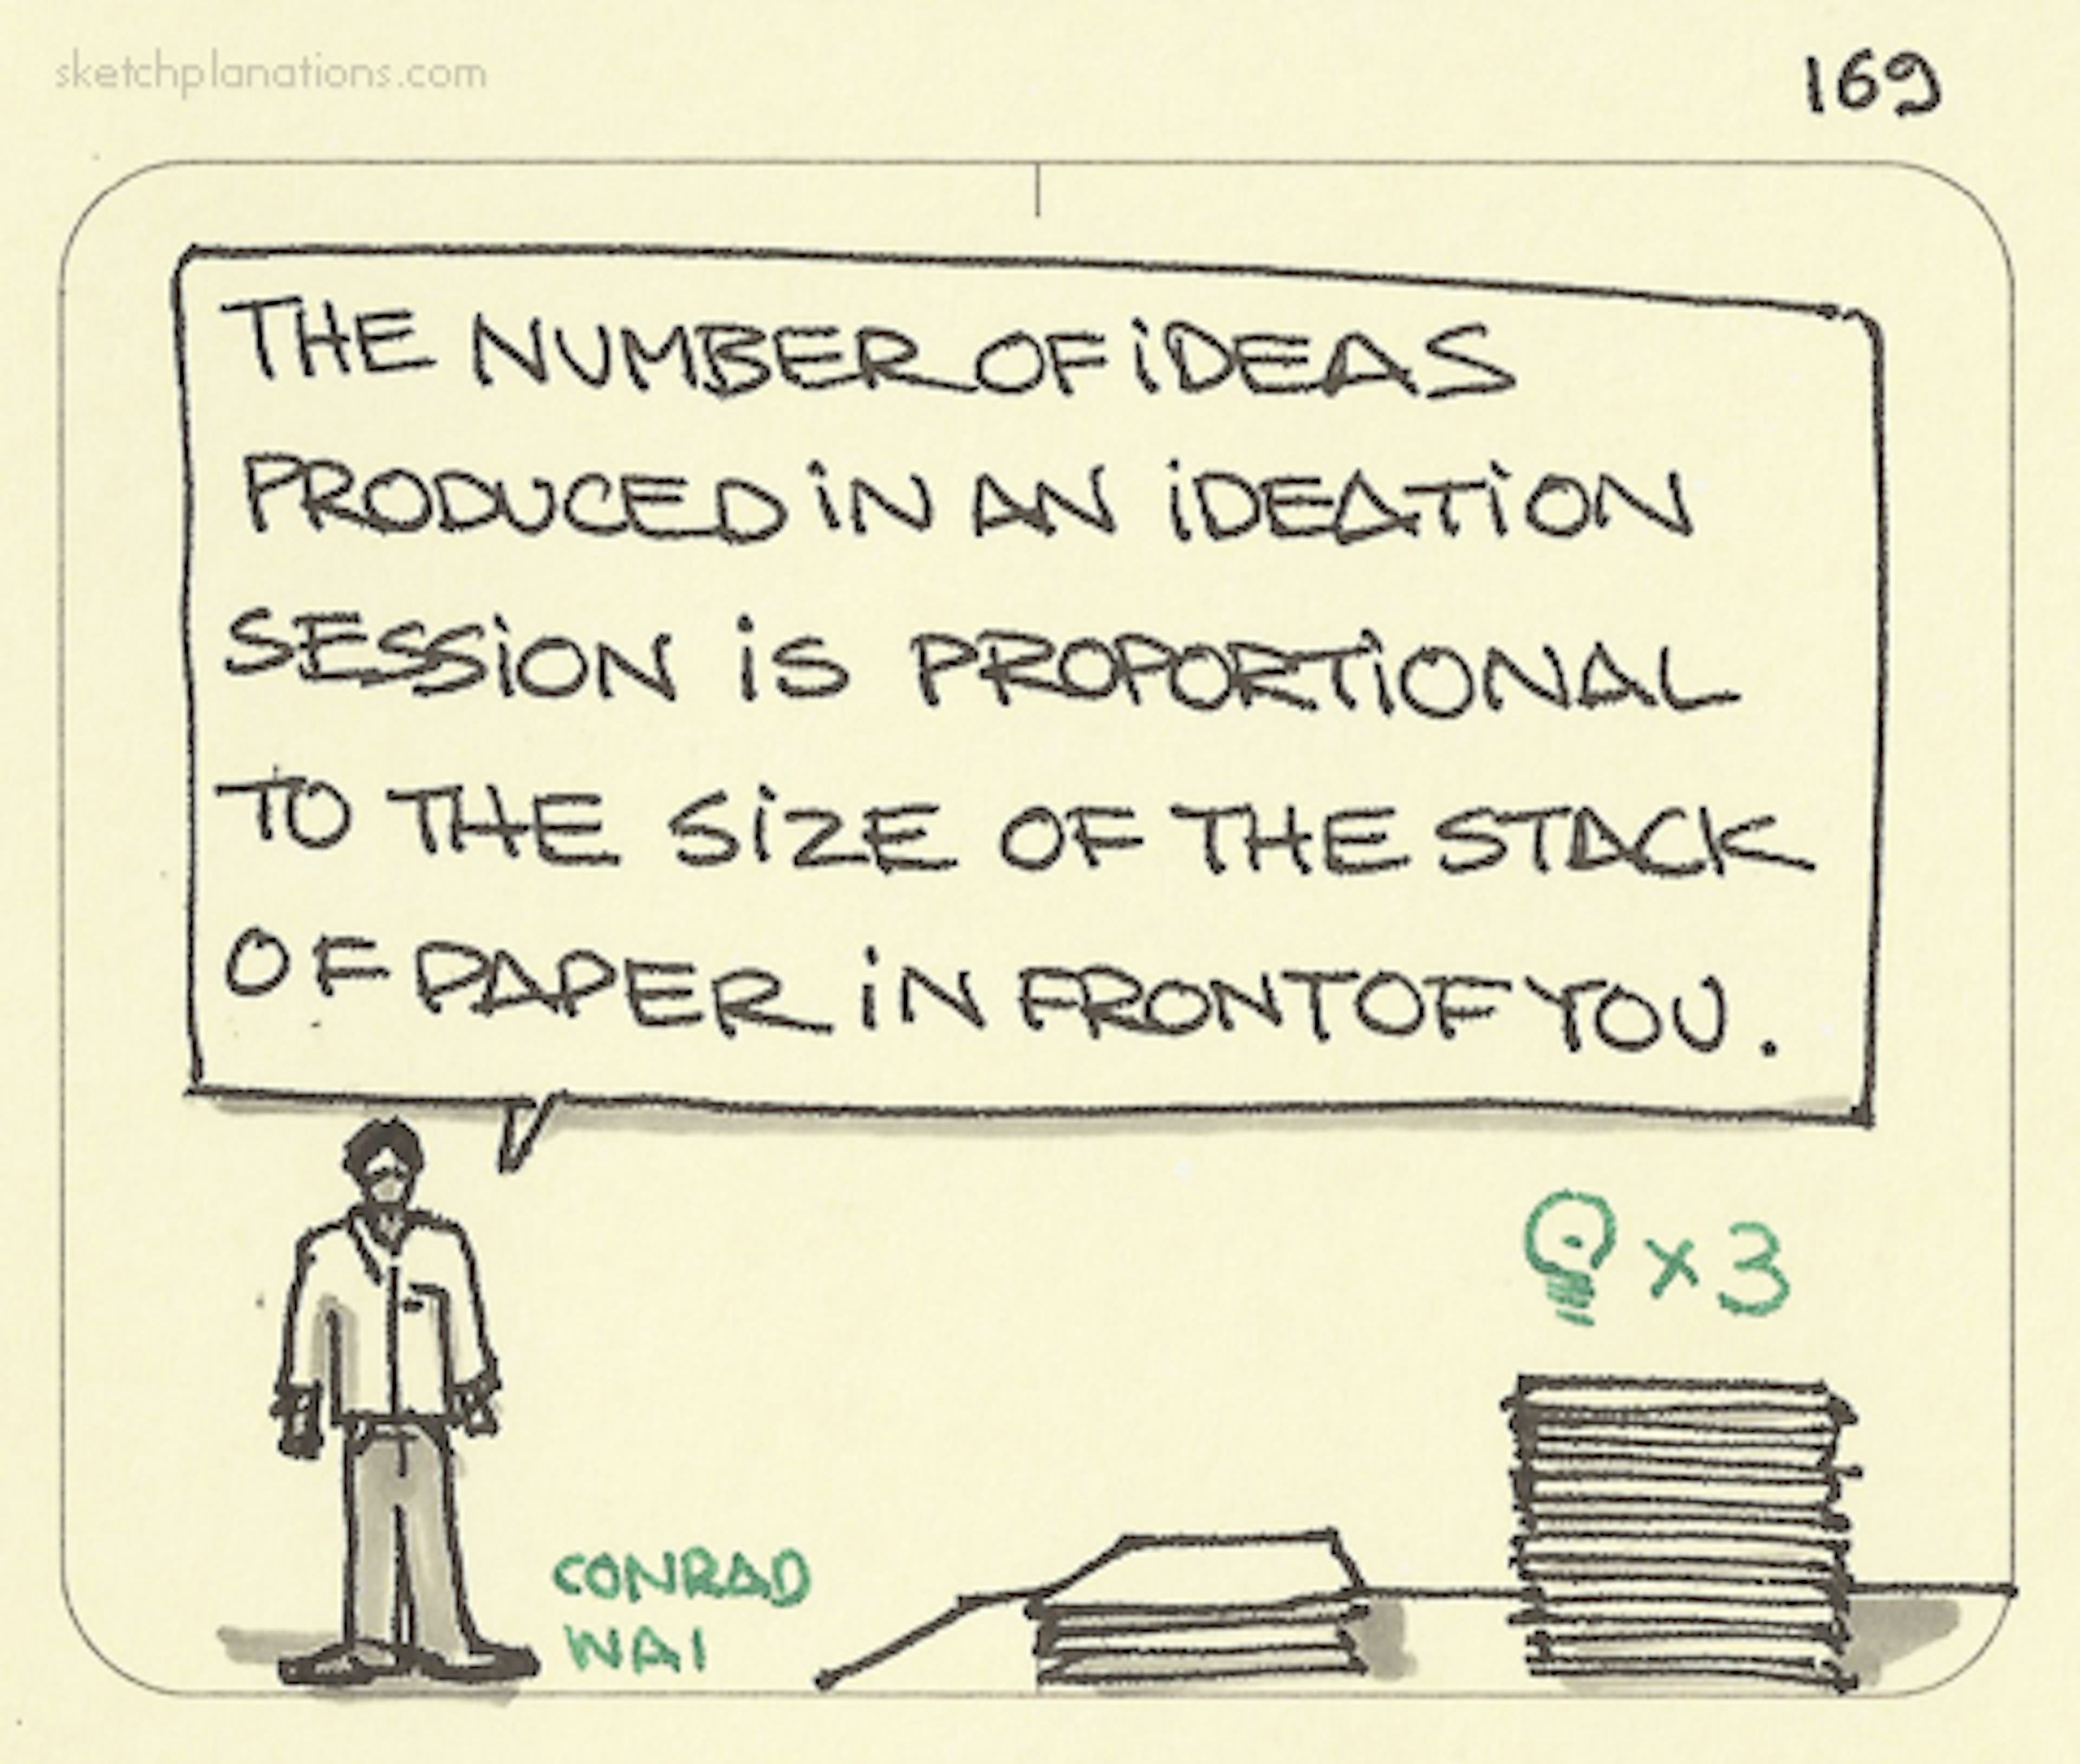 The number of ideas produced in an ideation session is proportional to the size of the stack of paper in front of you - Sketchplanations